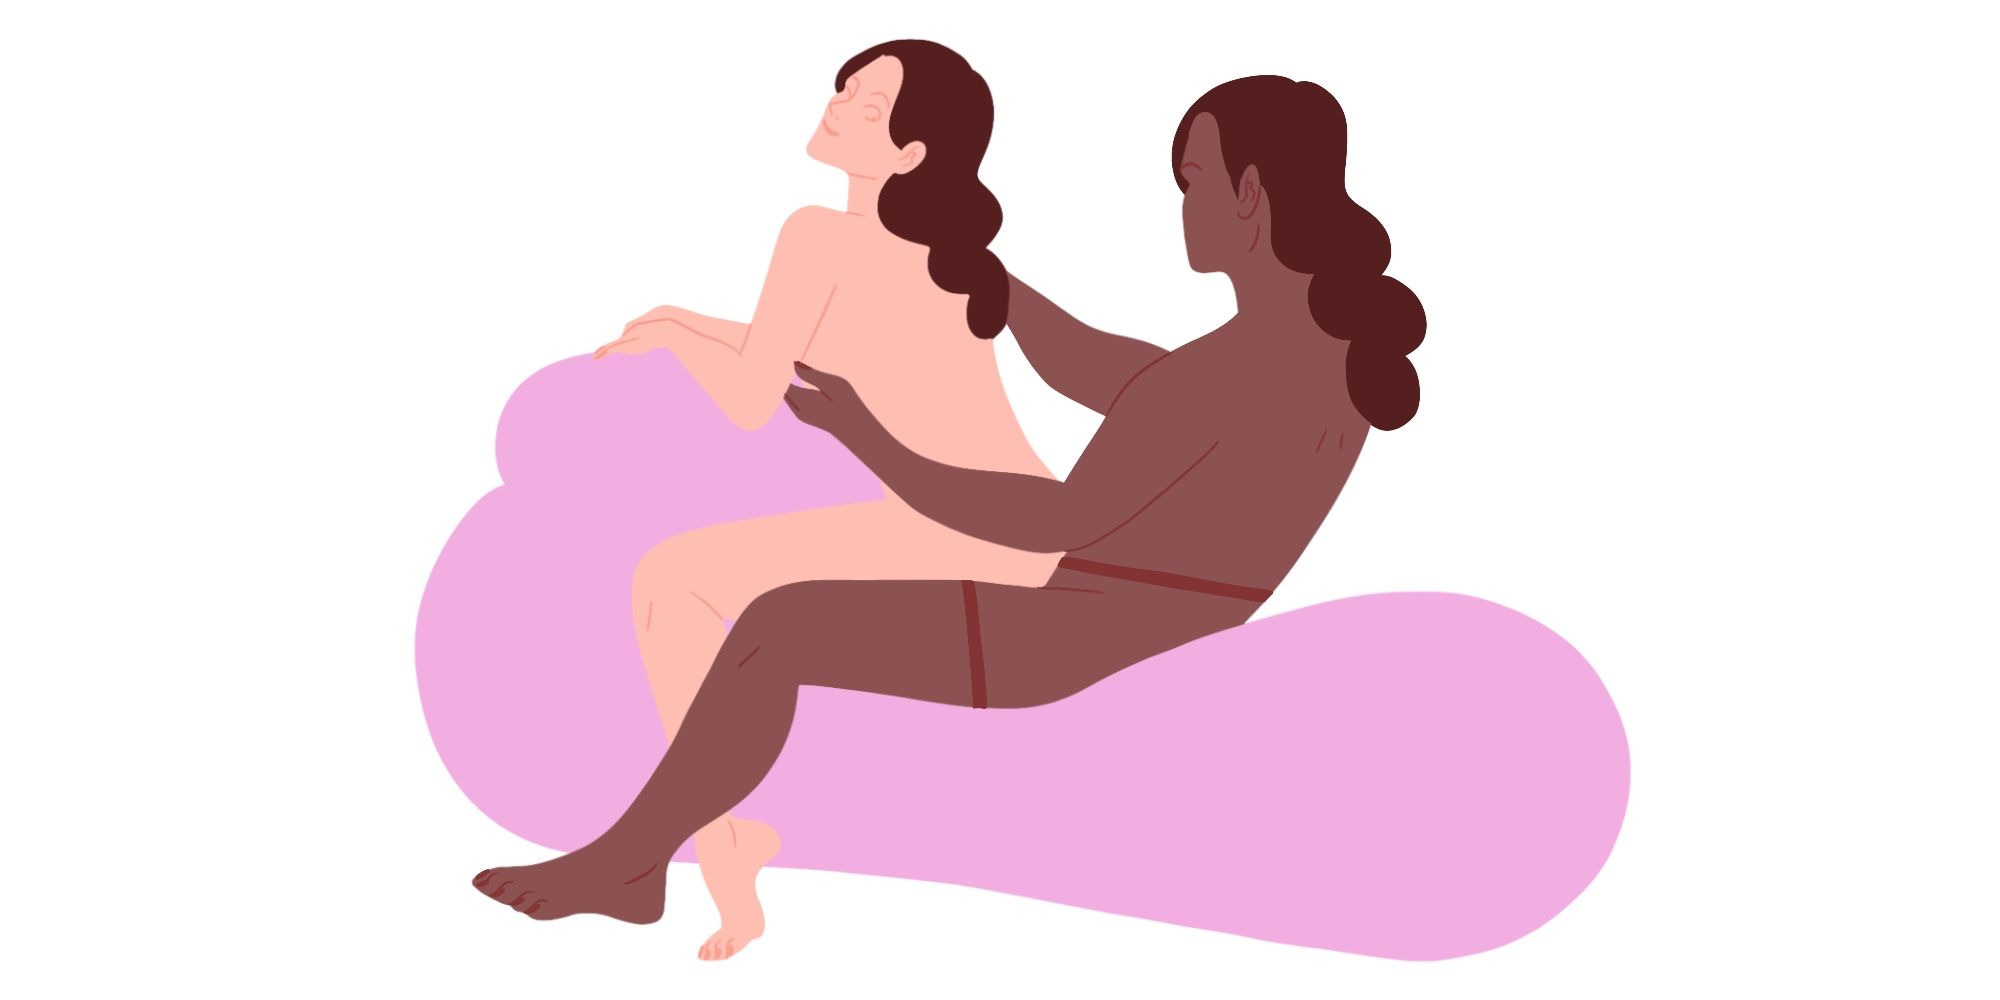 11 Best Boob Sex Positions pic